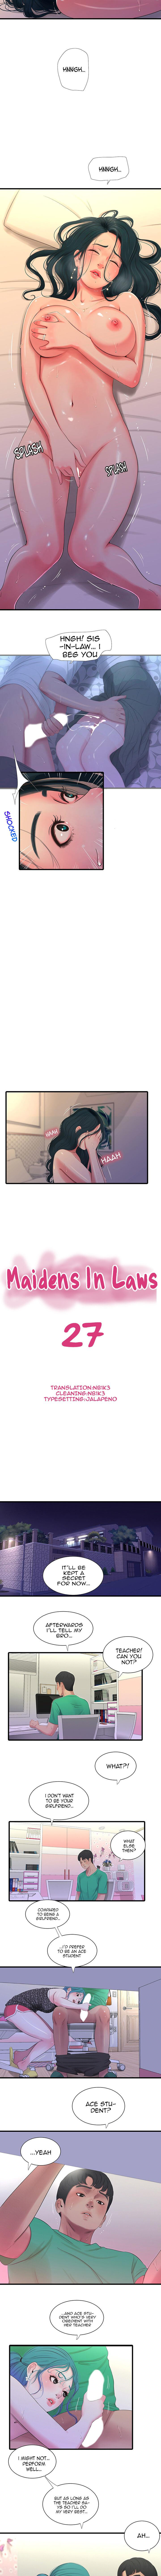 Sexcams Maidens In-Law | One's In-Laws Virgins Ch. 26-30 [English] Money - Page 11